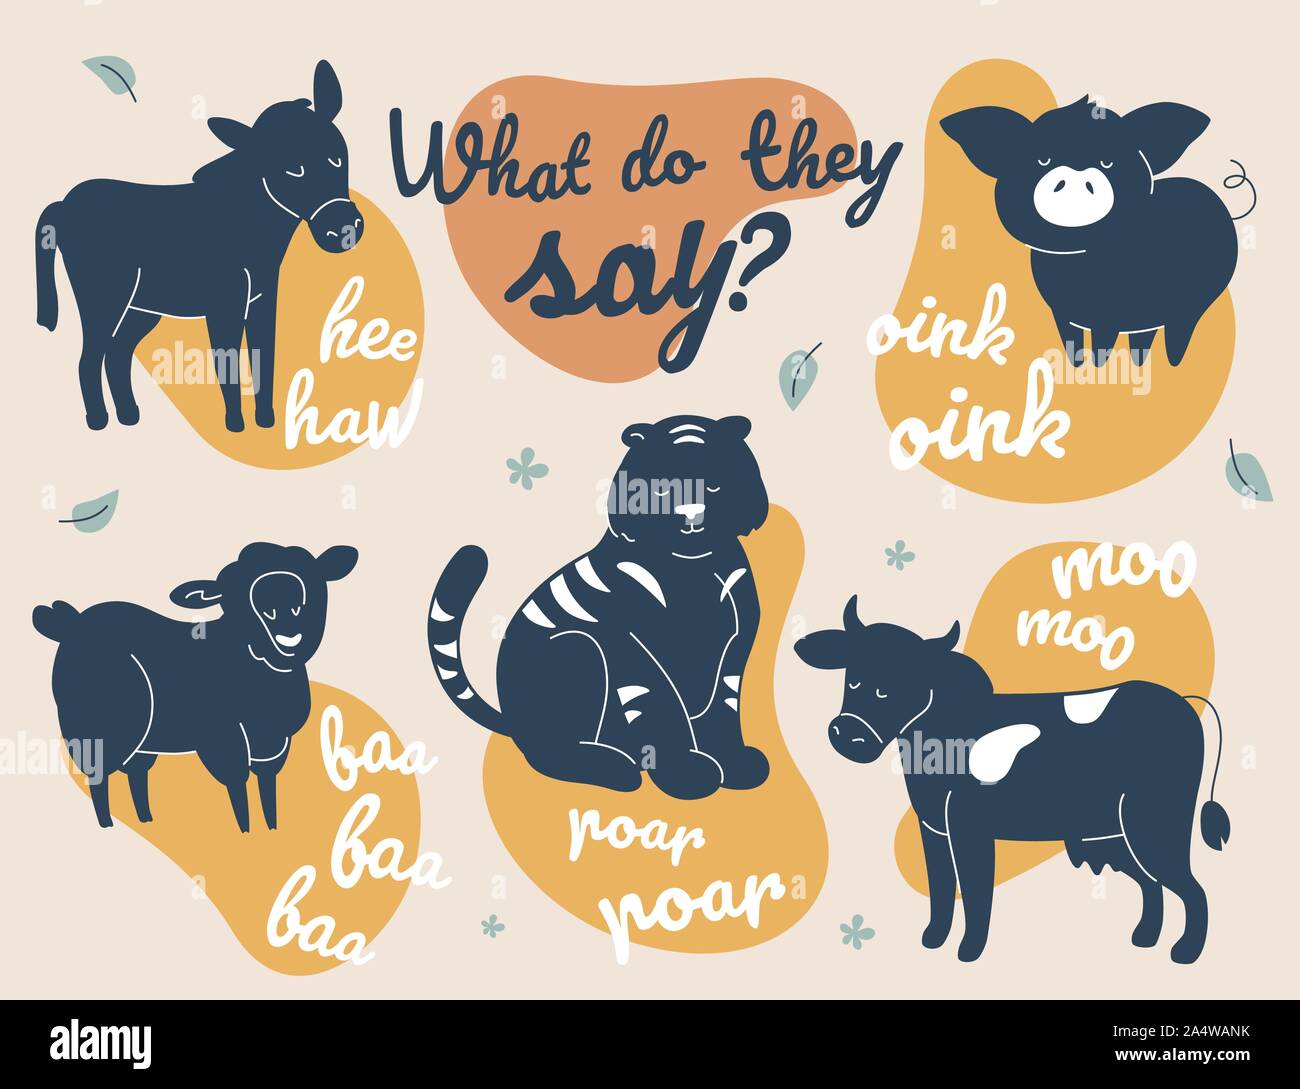 What do they say - modern vector illustration Stock Vector